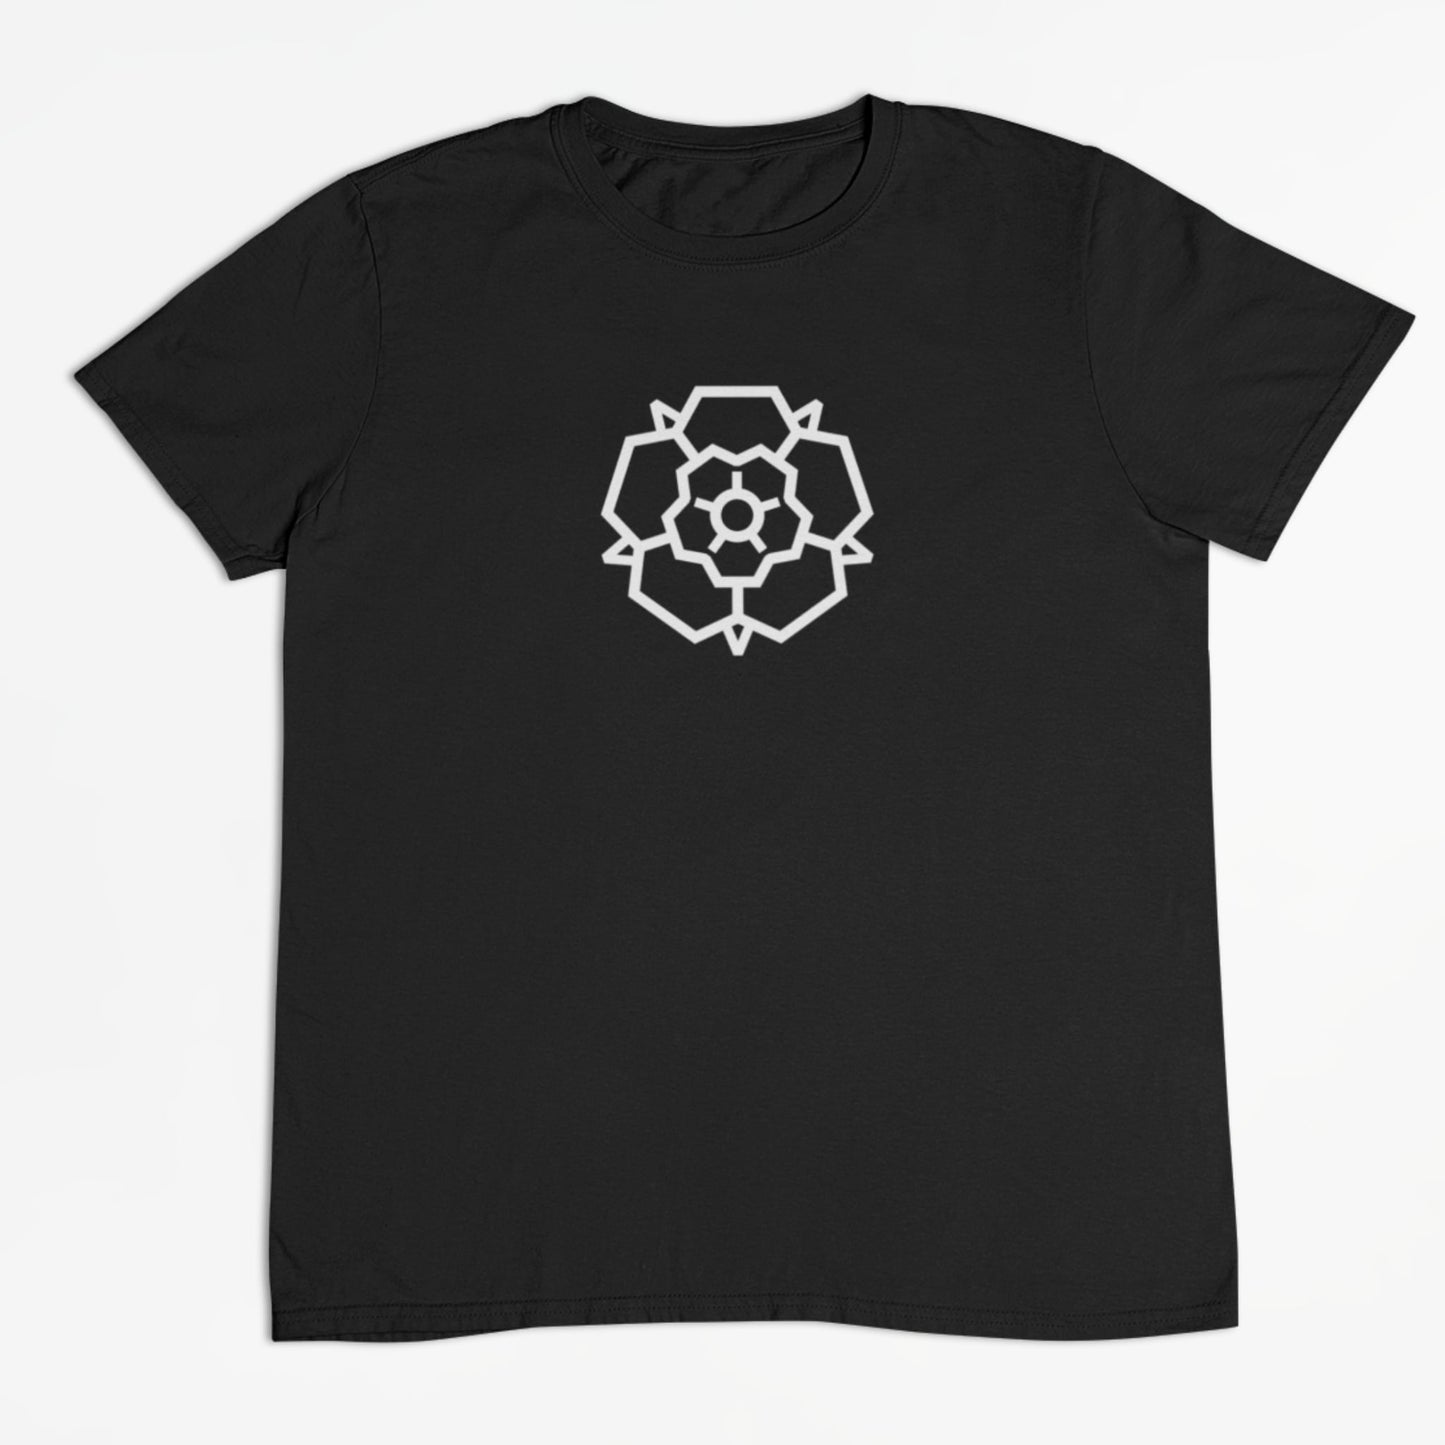 Yorkshire Rose Signature T-Shirt - The Great Yorkshire Shop